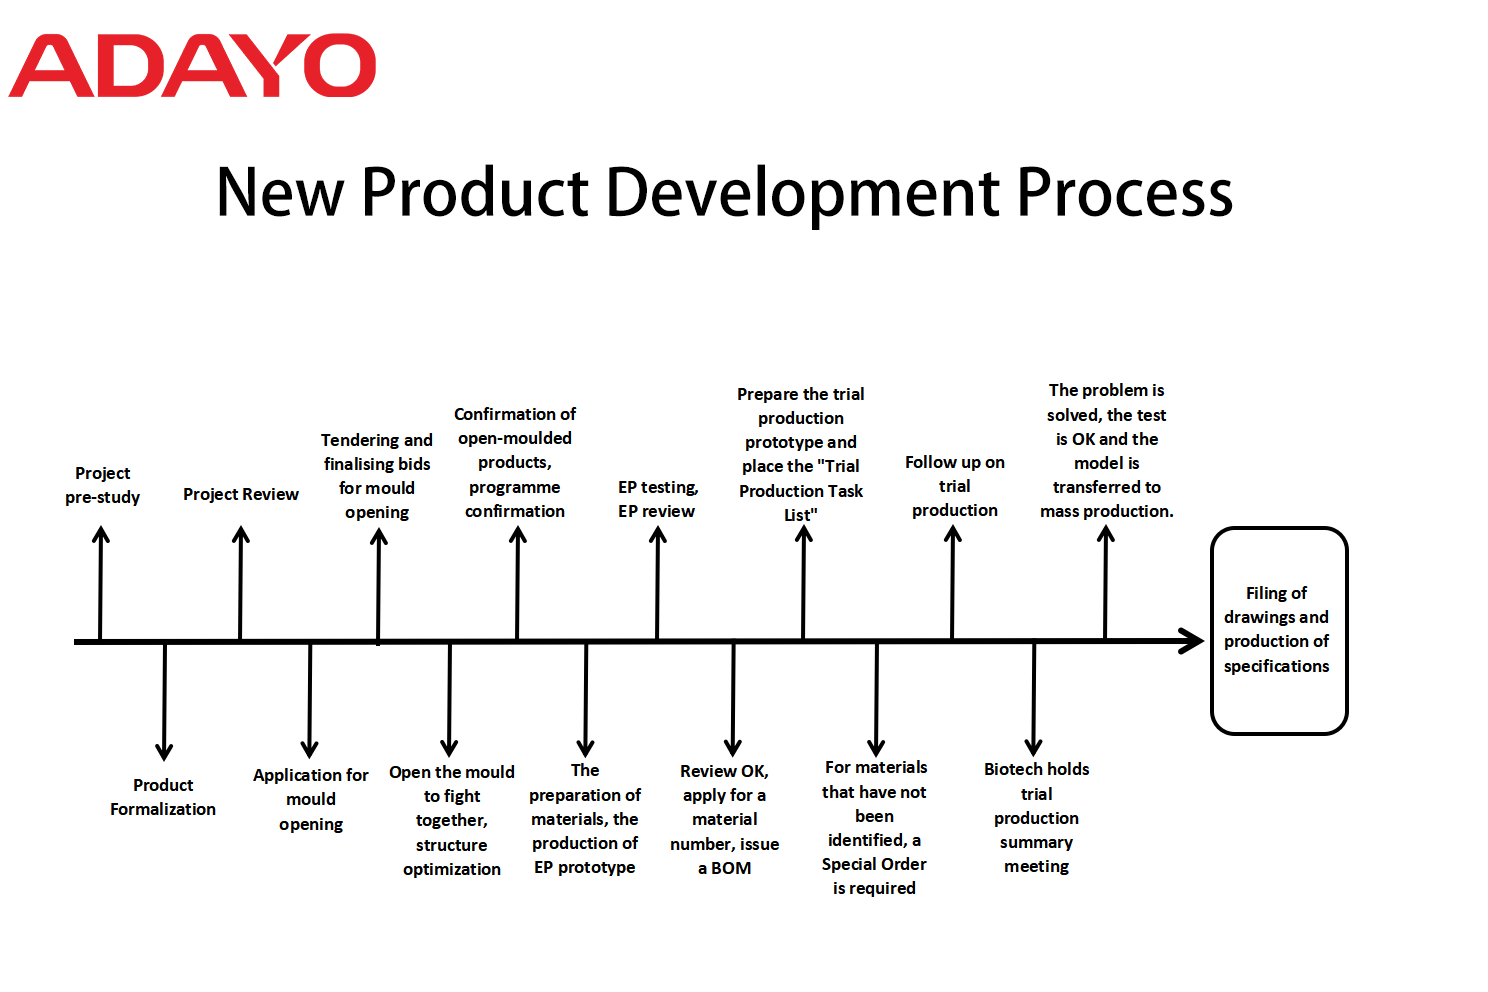 How does ADAYO lighting new product development process work?